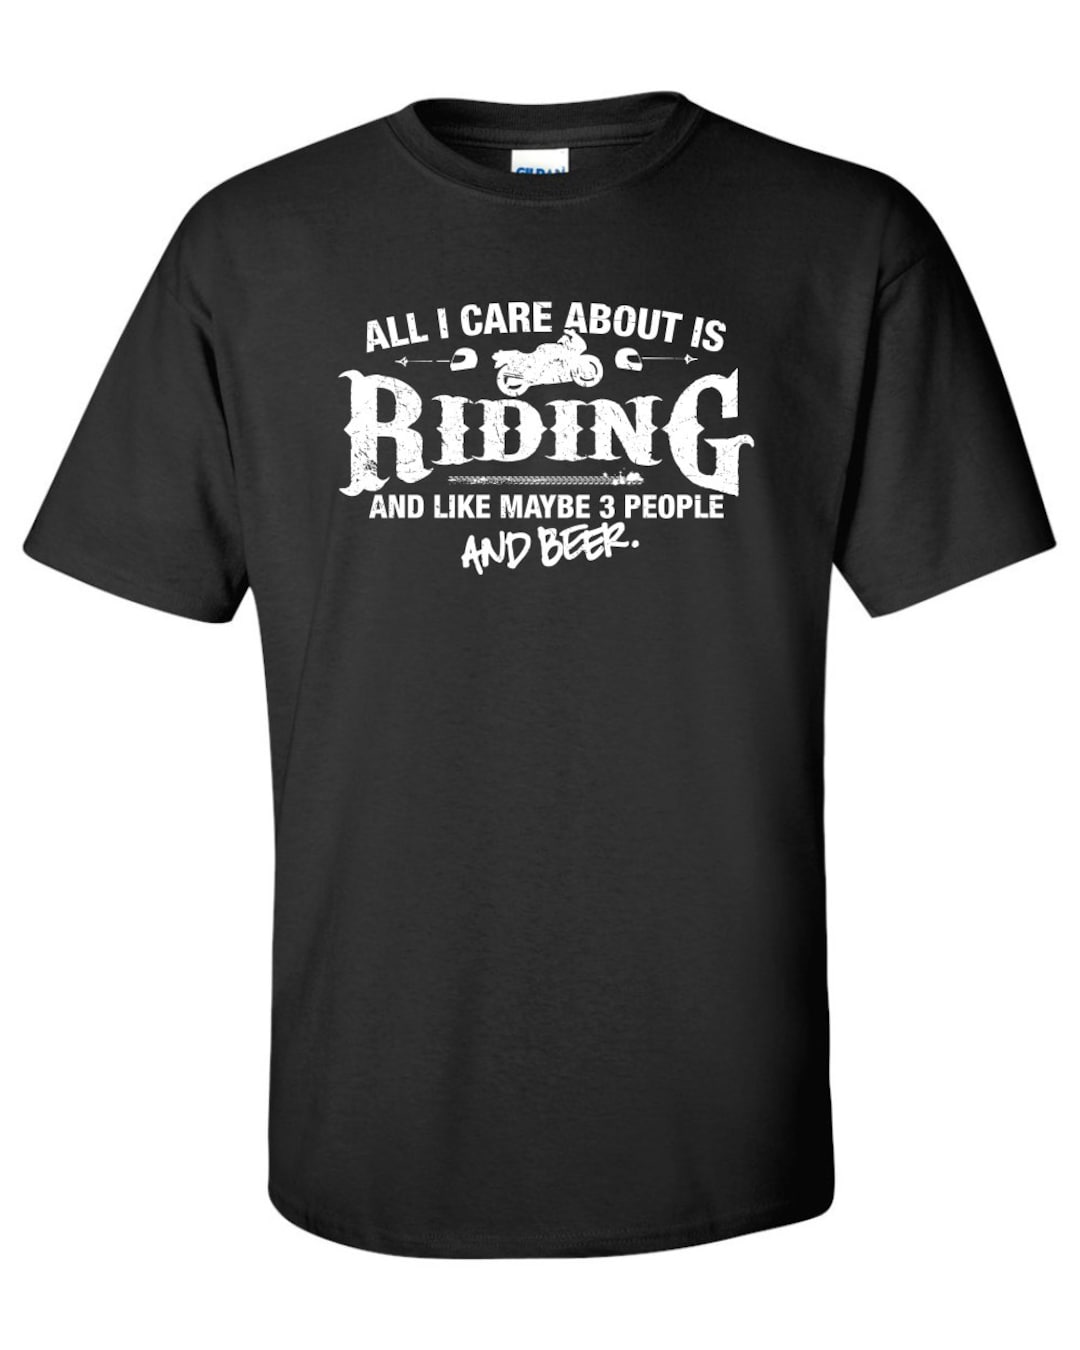 All I Care About is Riding and Like Maybe 3 People and Beer - Etsy